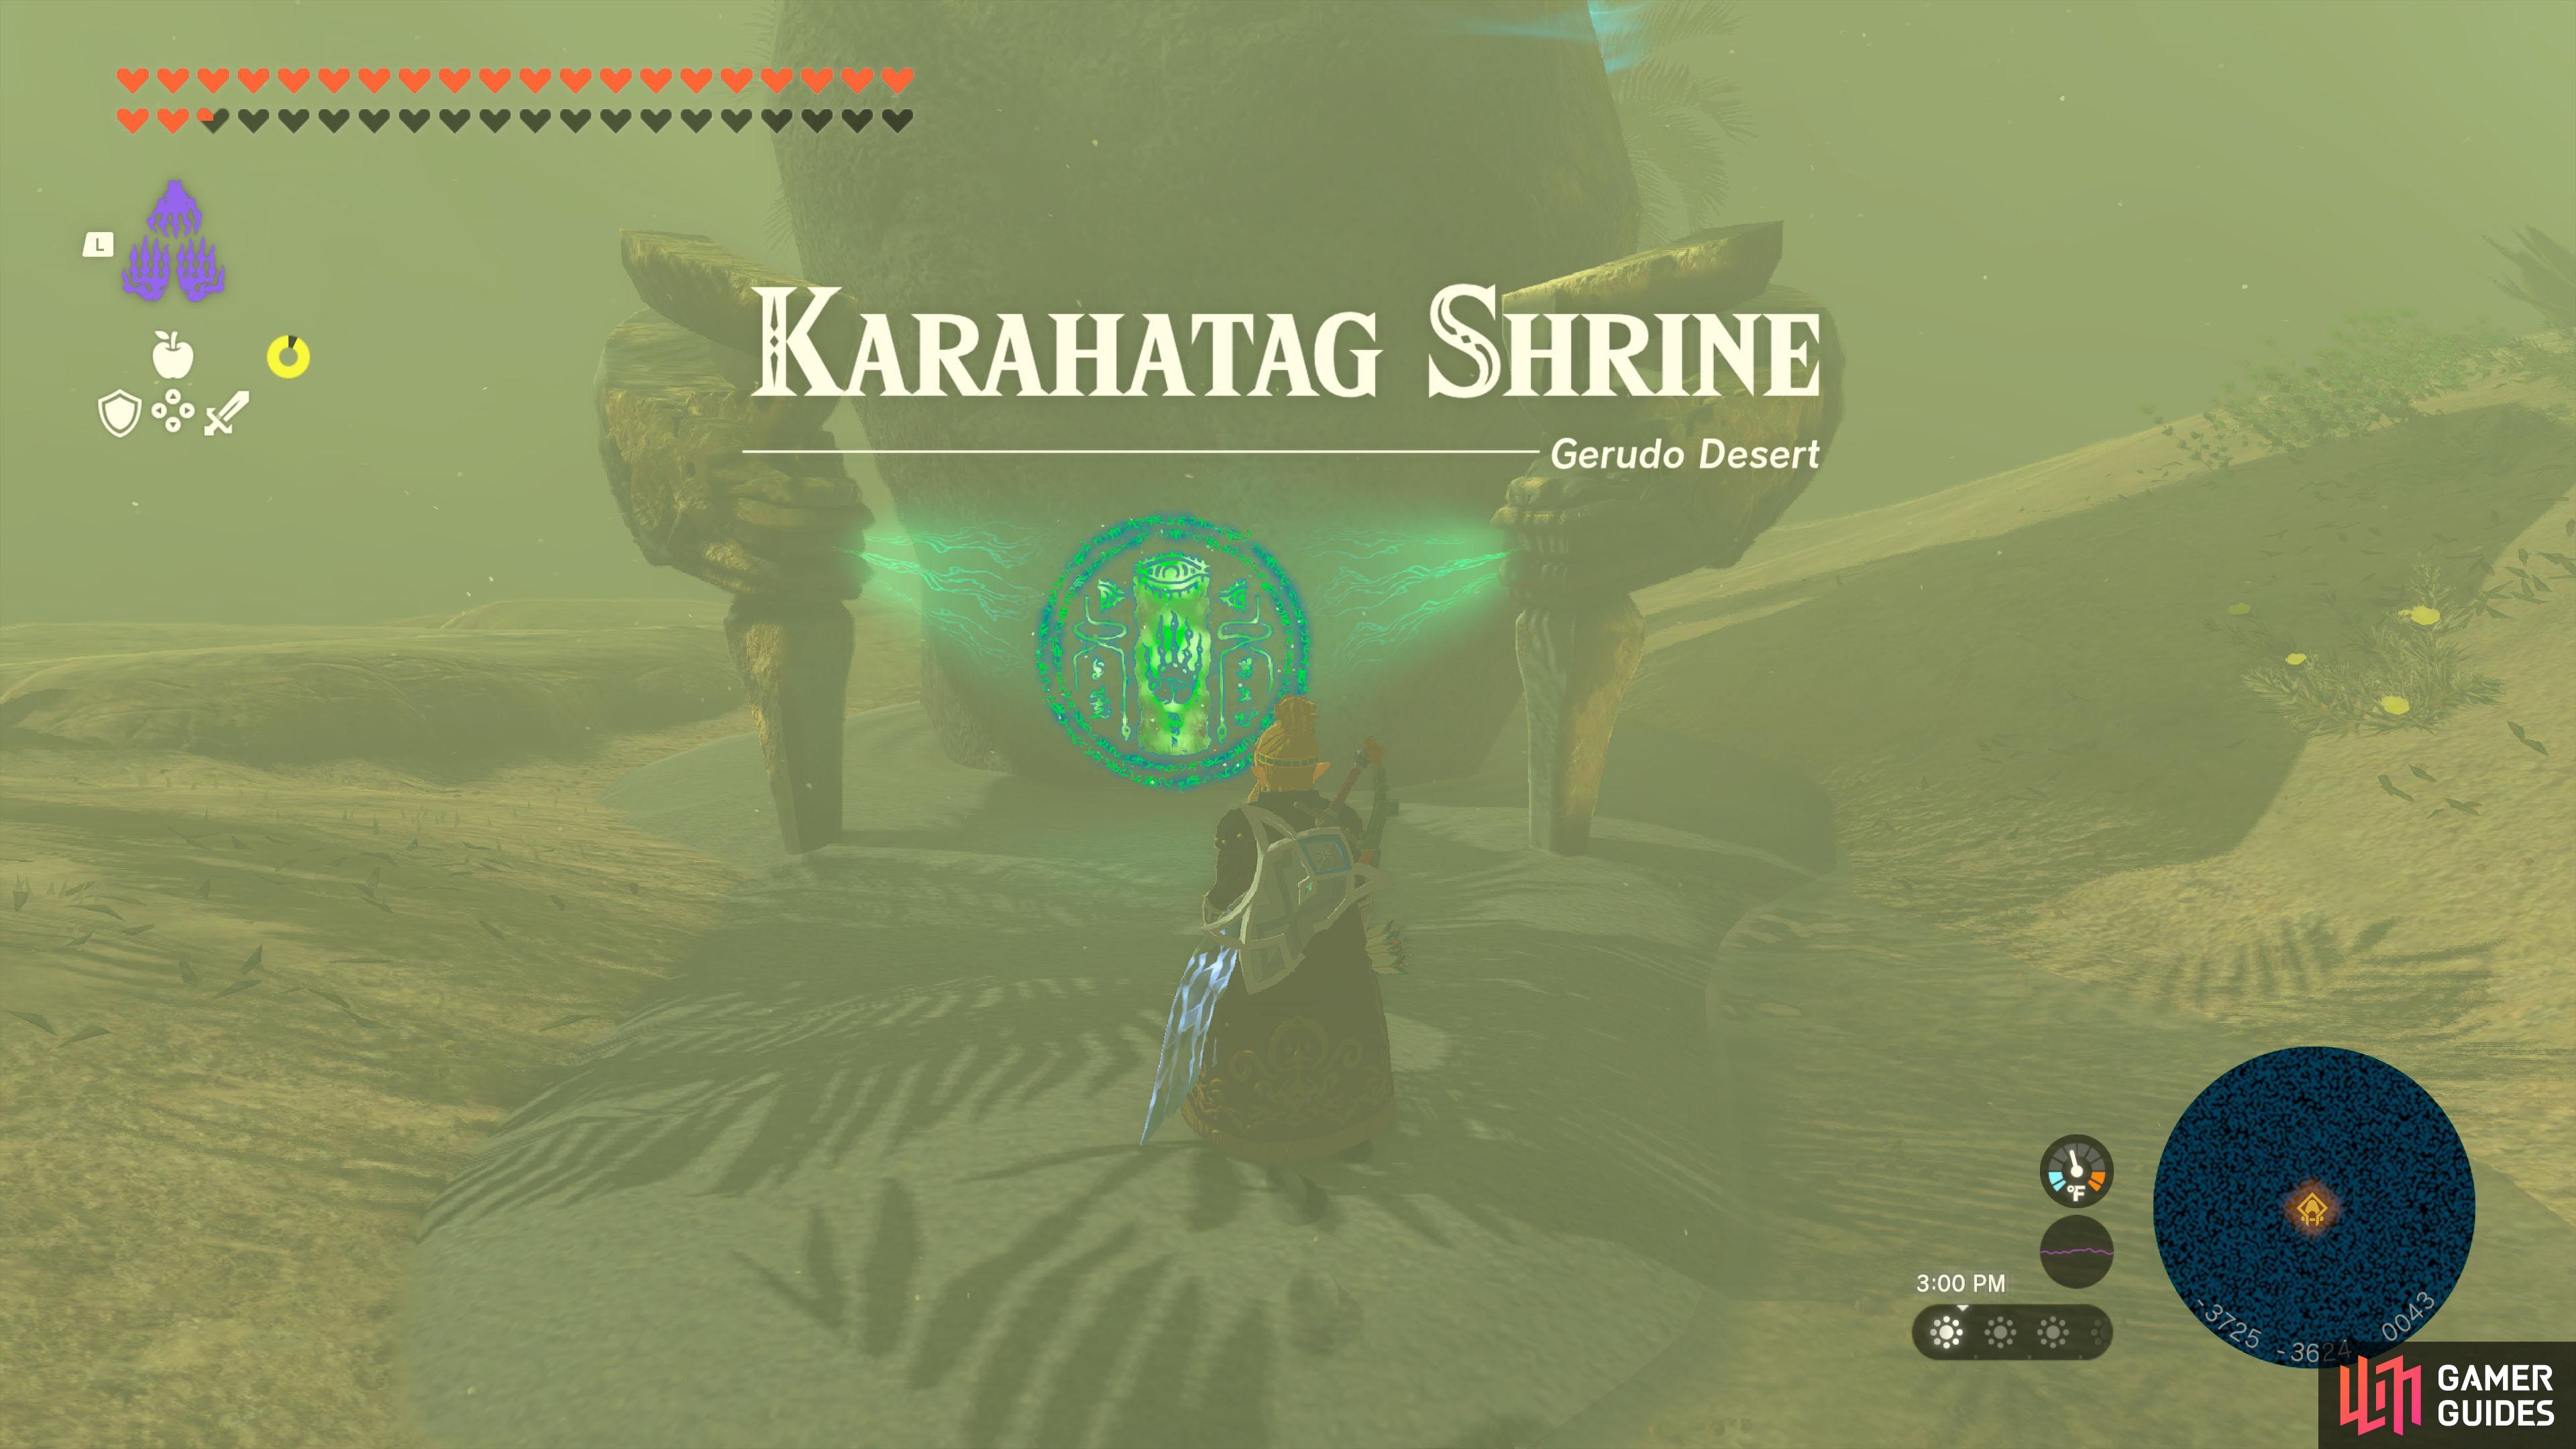 The Karahatag Shrine is found on the Southern Oasis, in the Gerudo Desert.